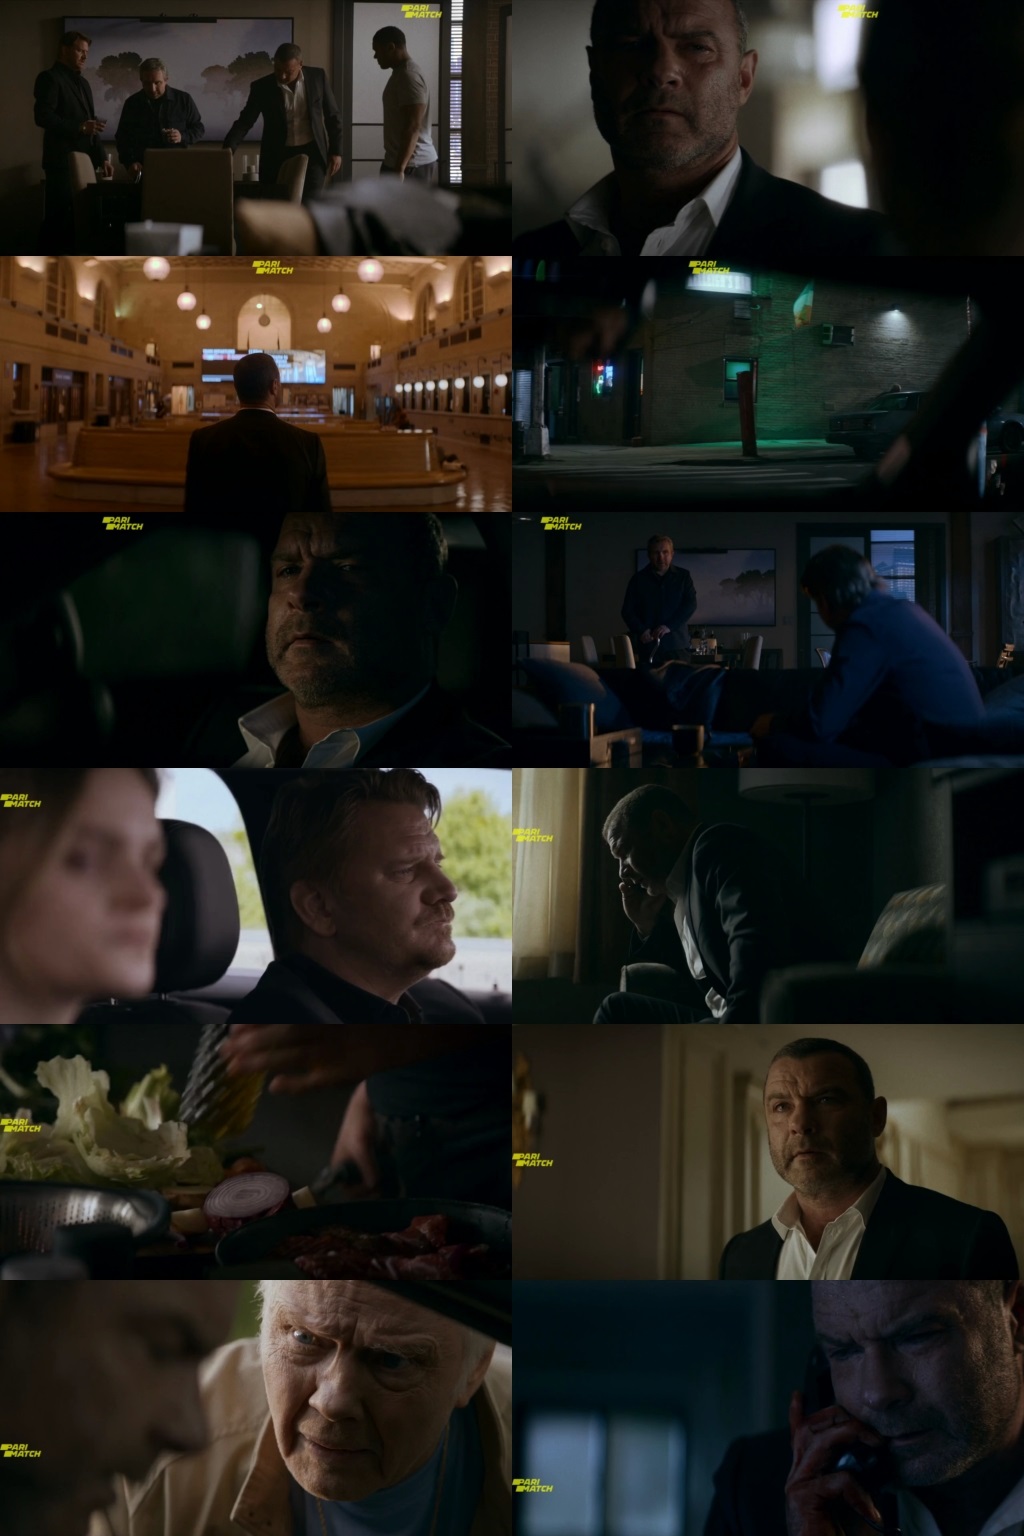 Ray Donovan The Movie 2022 HDRip 750MB Telugu (Voice Over) Dual Audio 720p Download